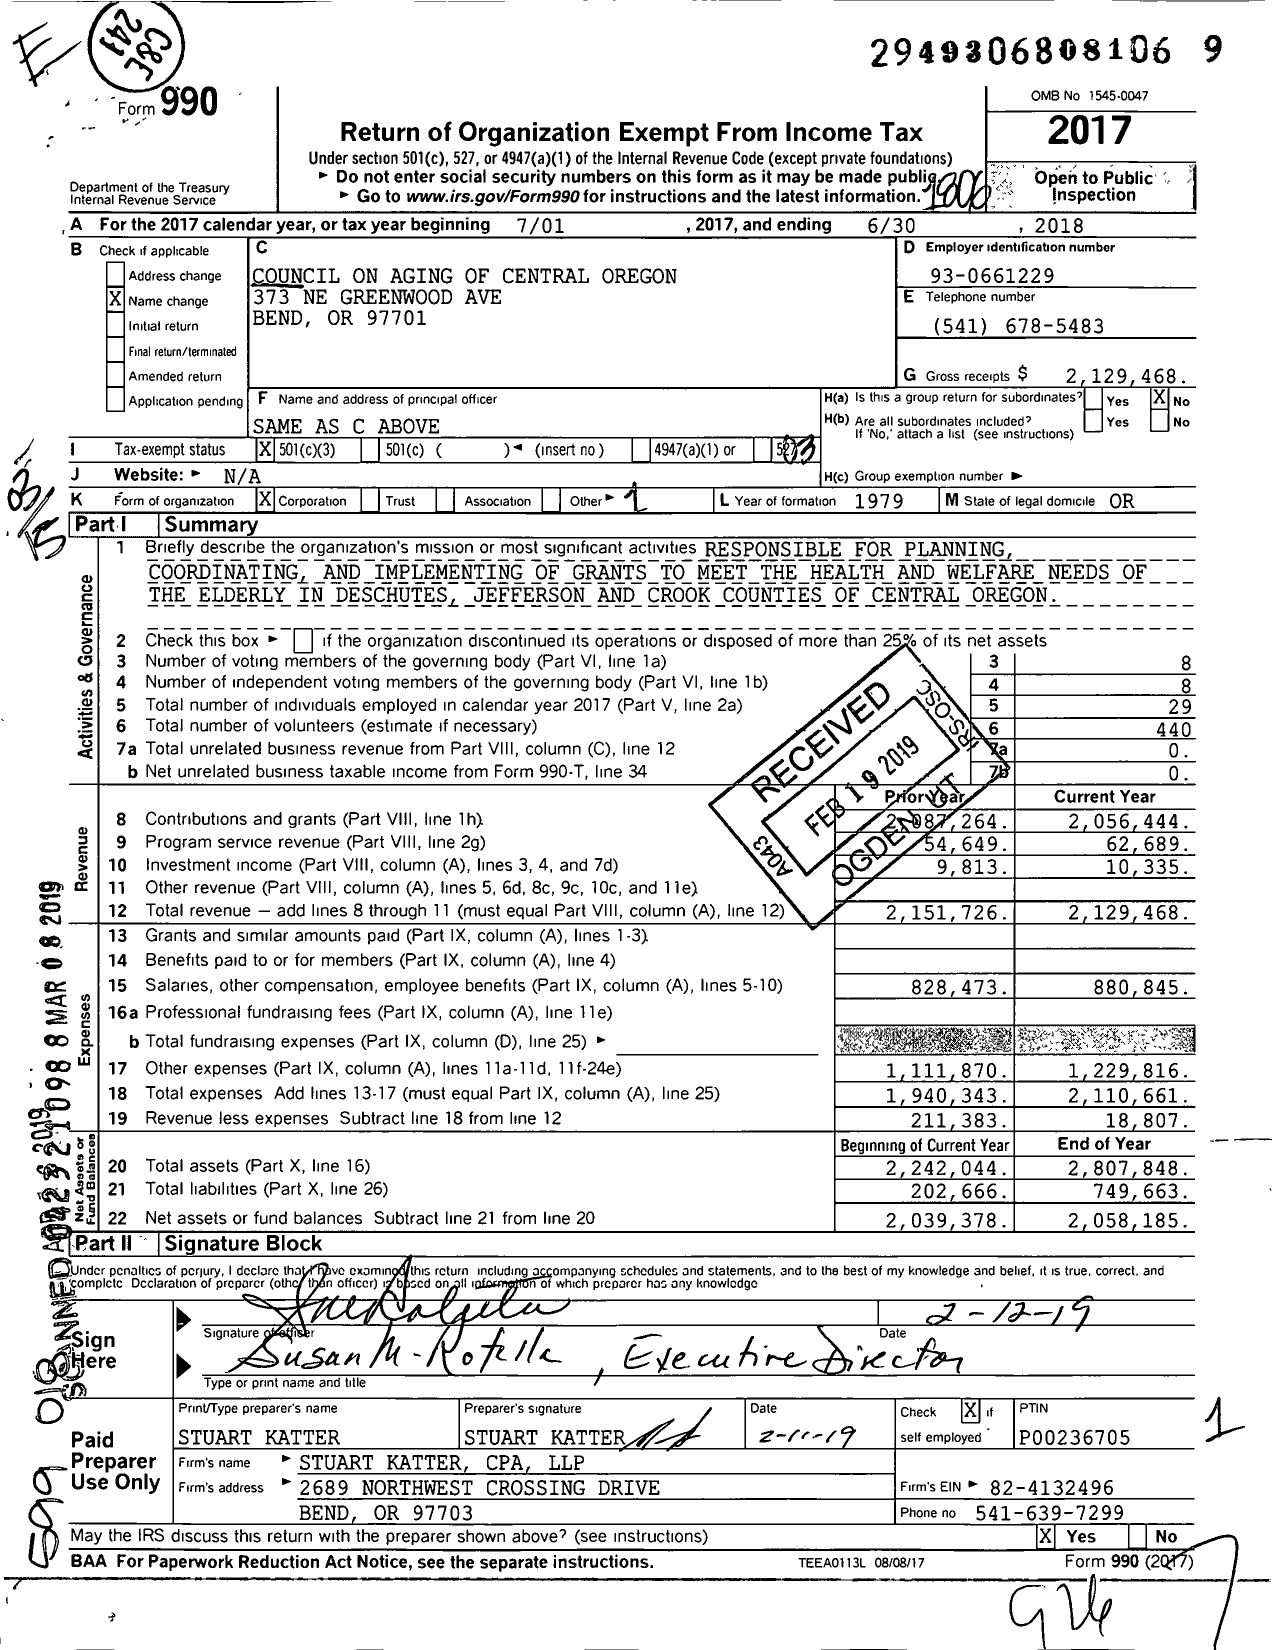 Image of first page of 2017 Form 990 for Council on Aging of Central Oregon (CoA)